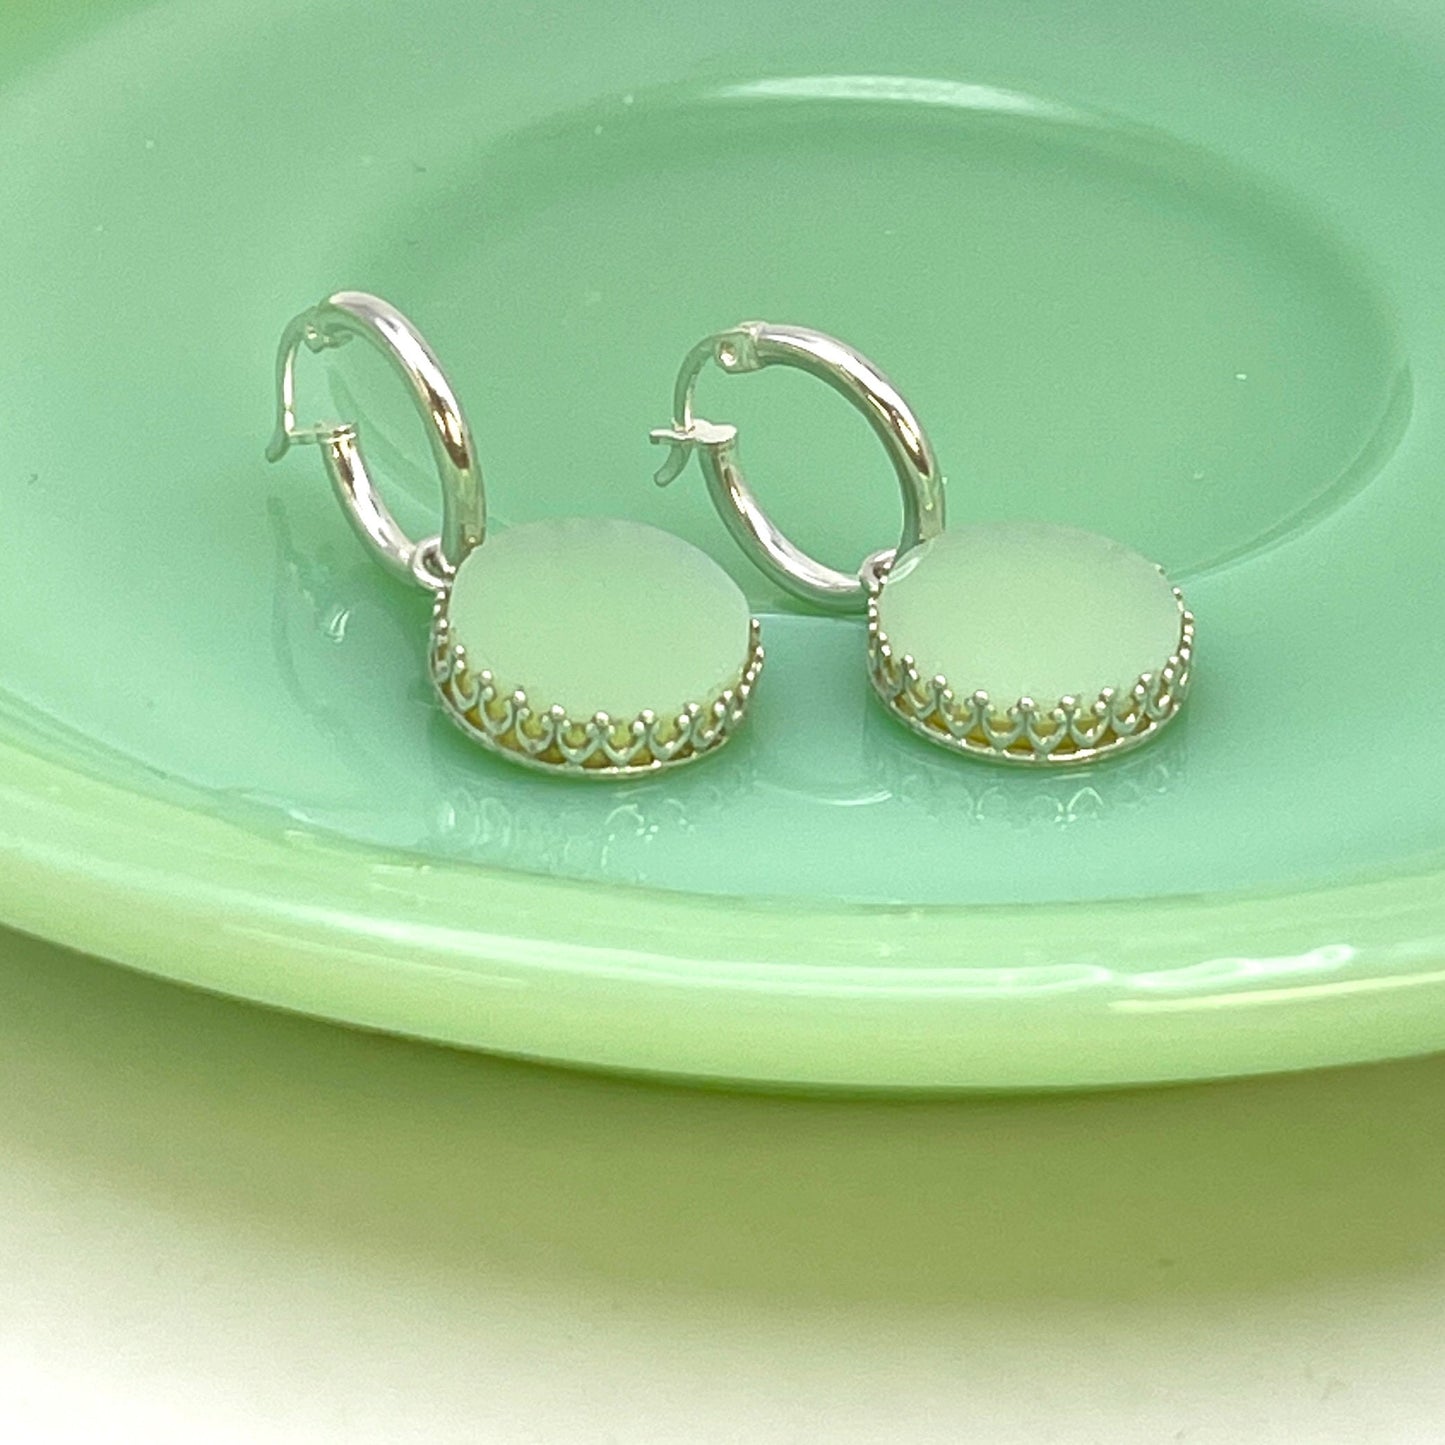 Fire King Jadeite Dangle Earrings, Unique Gifts for Wife, Broken China Jewelry, Sterling Silver Hoops